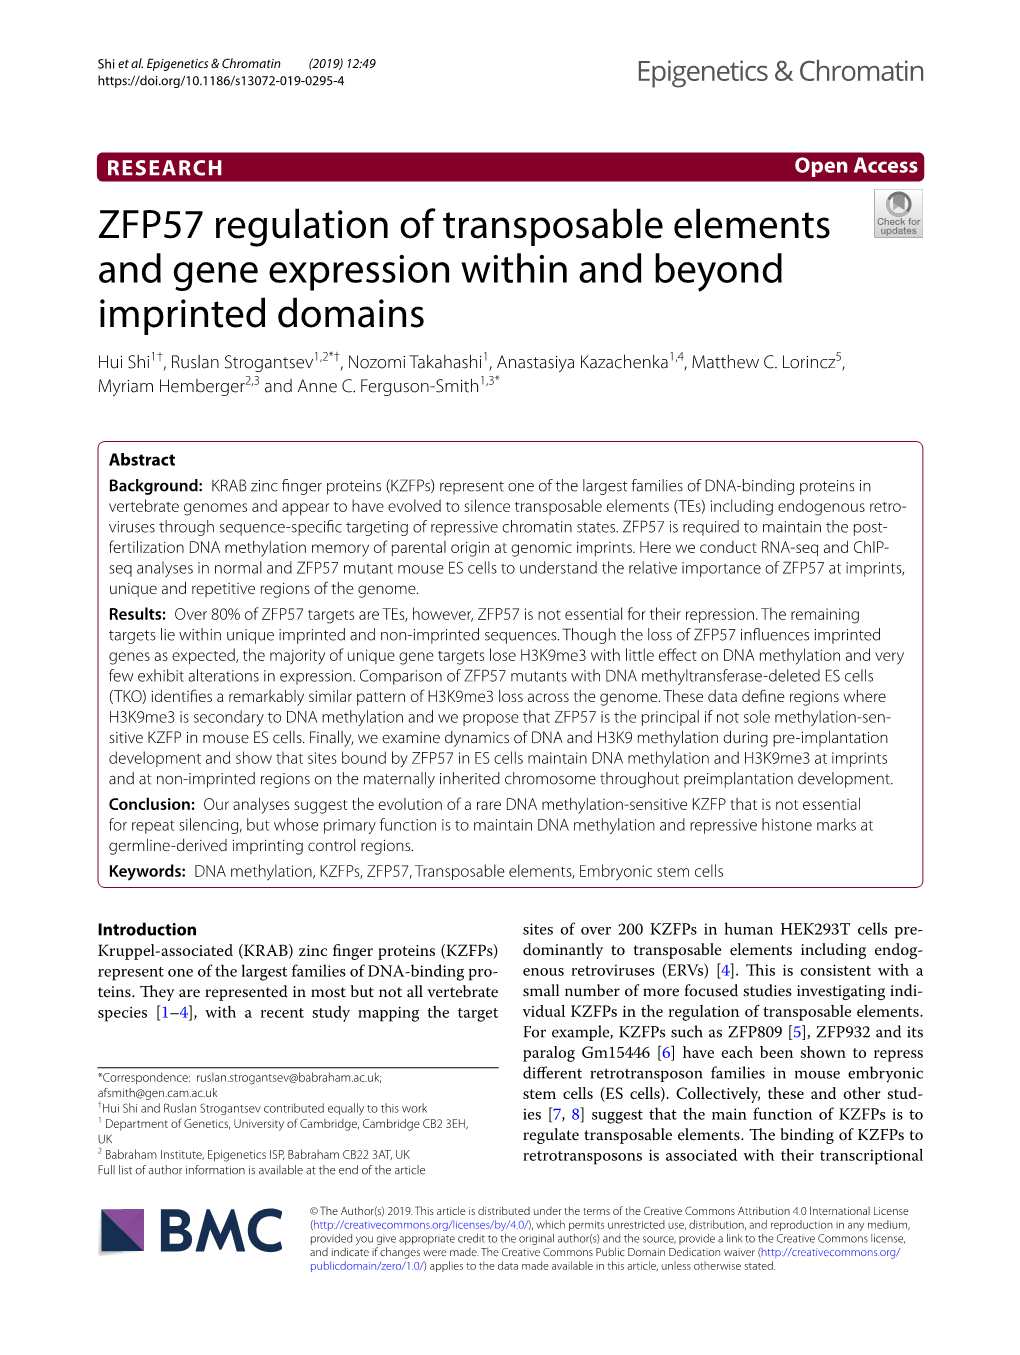 ZFP57 Regulation of Transposable Elements and Gene Expression